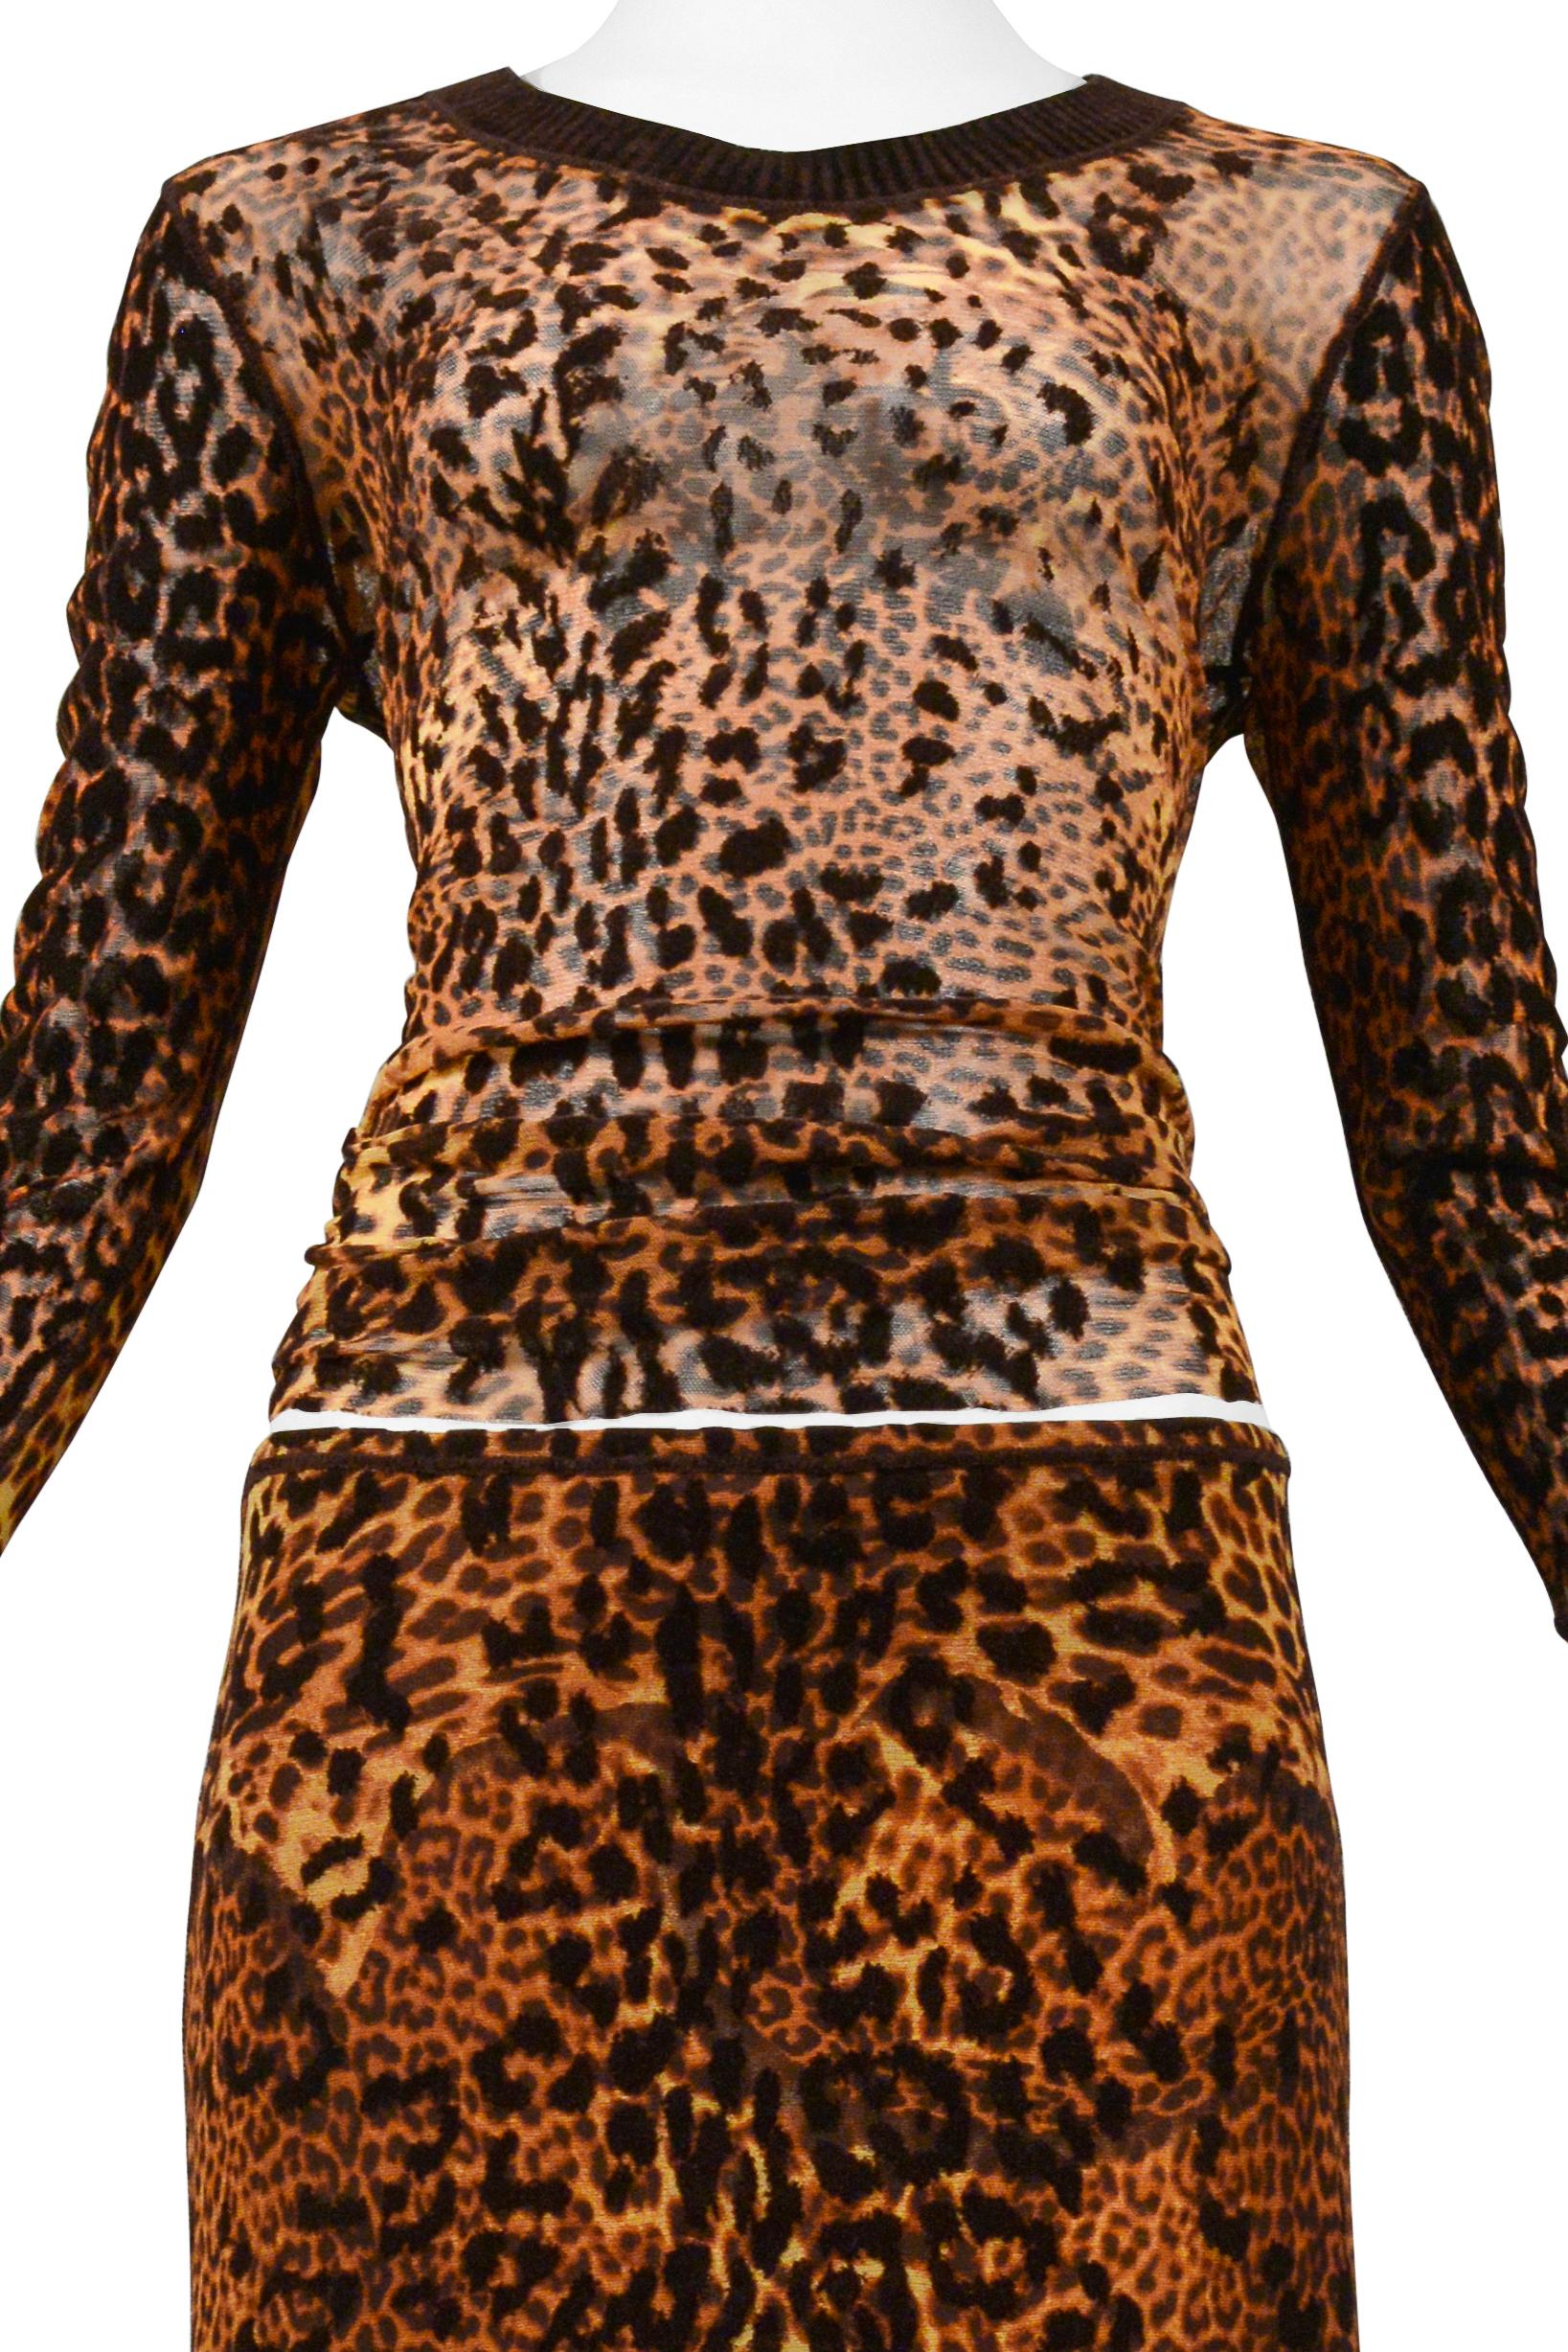 Jean Paul Gaultier Leopard Print Top & Skirt Ensemble In Excellent Condition In Los Angeles, CA